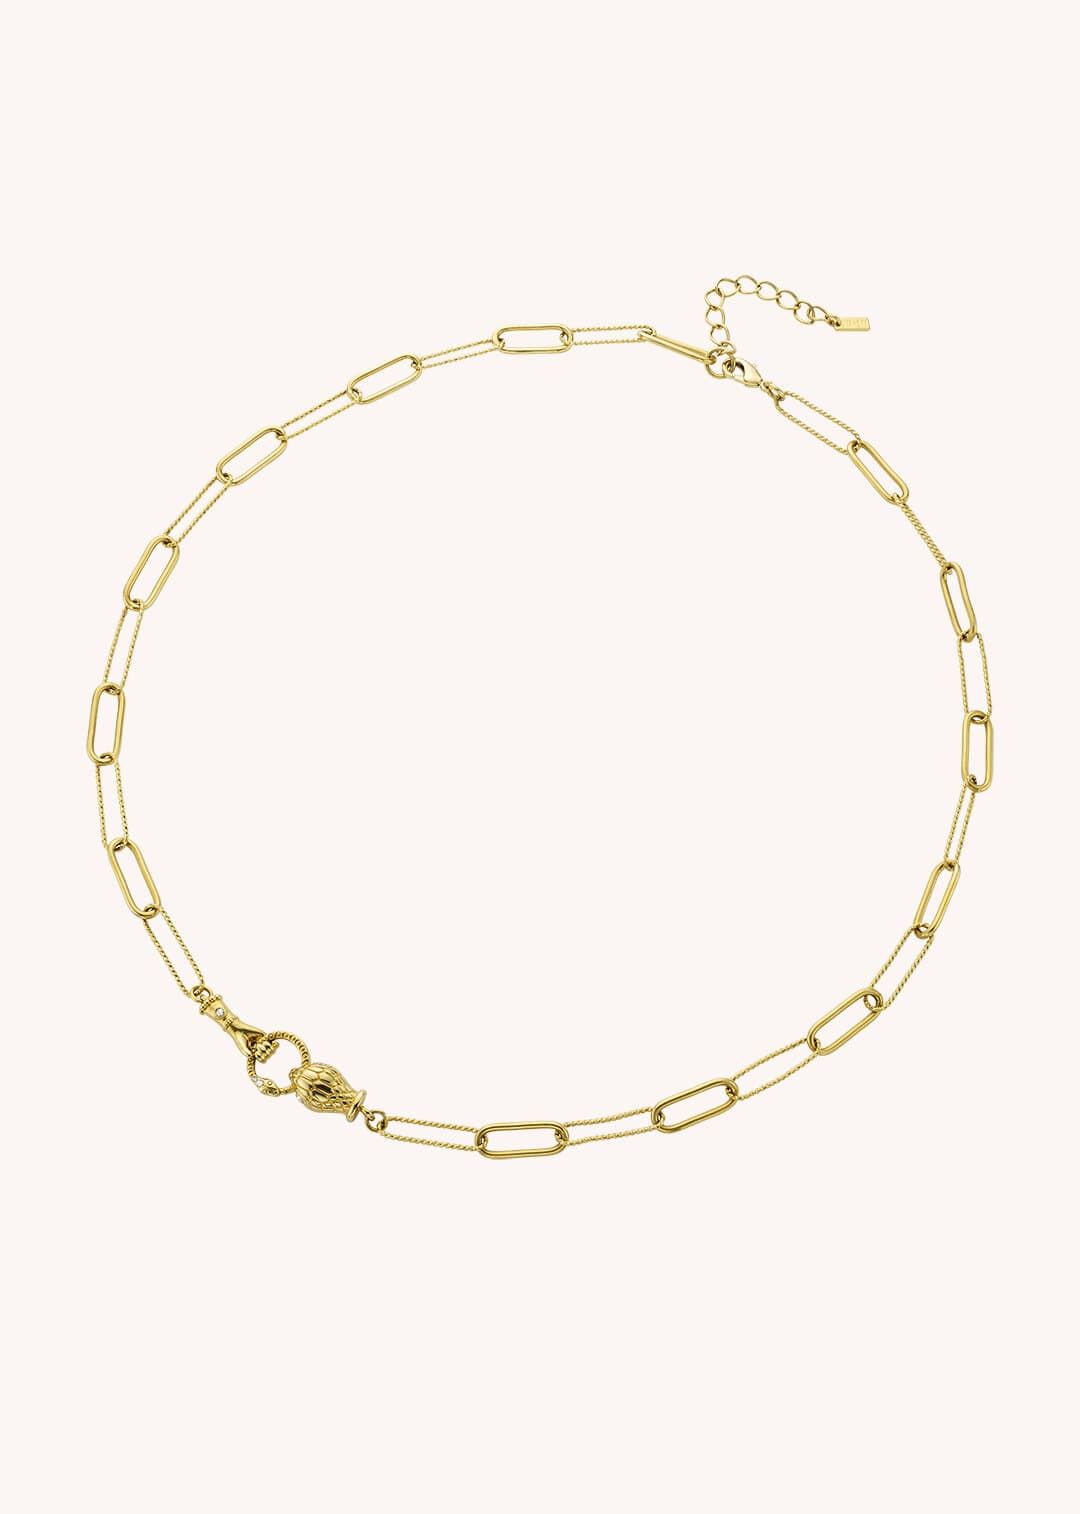 Necklace Co-212g Gold